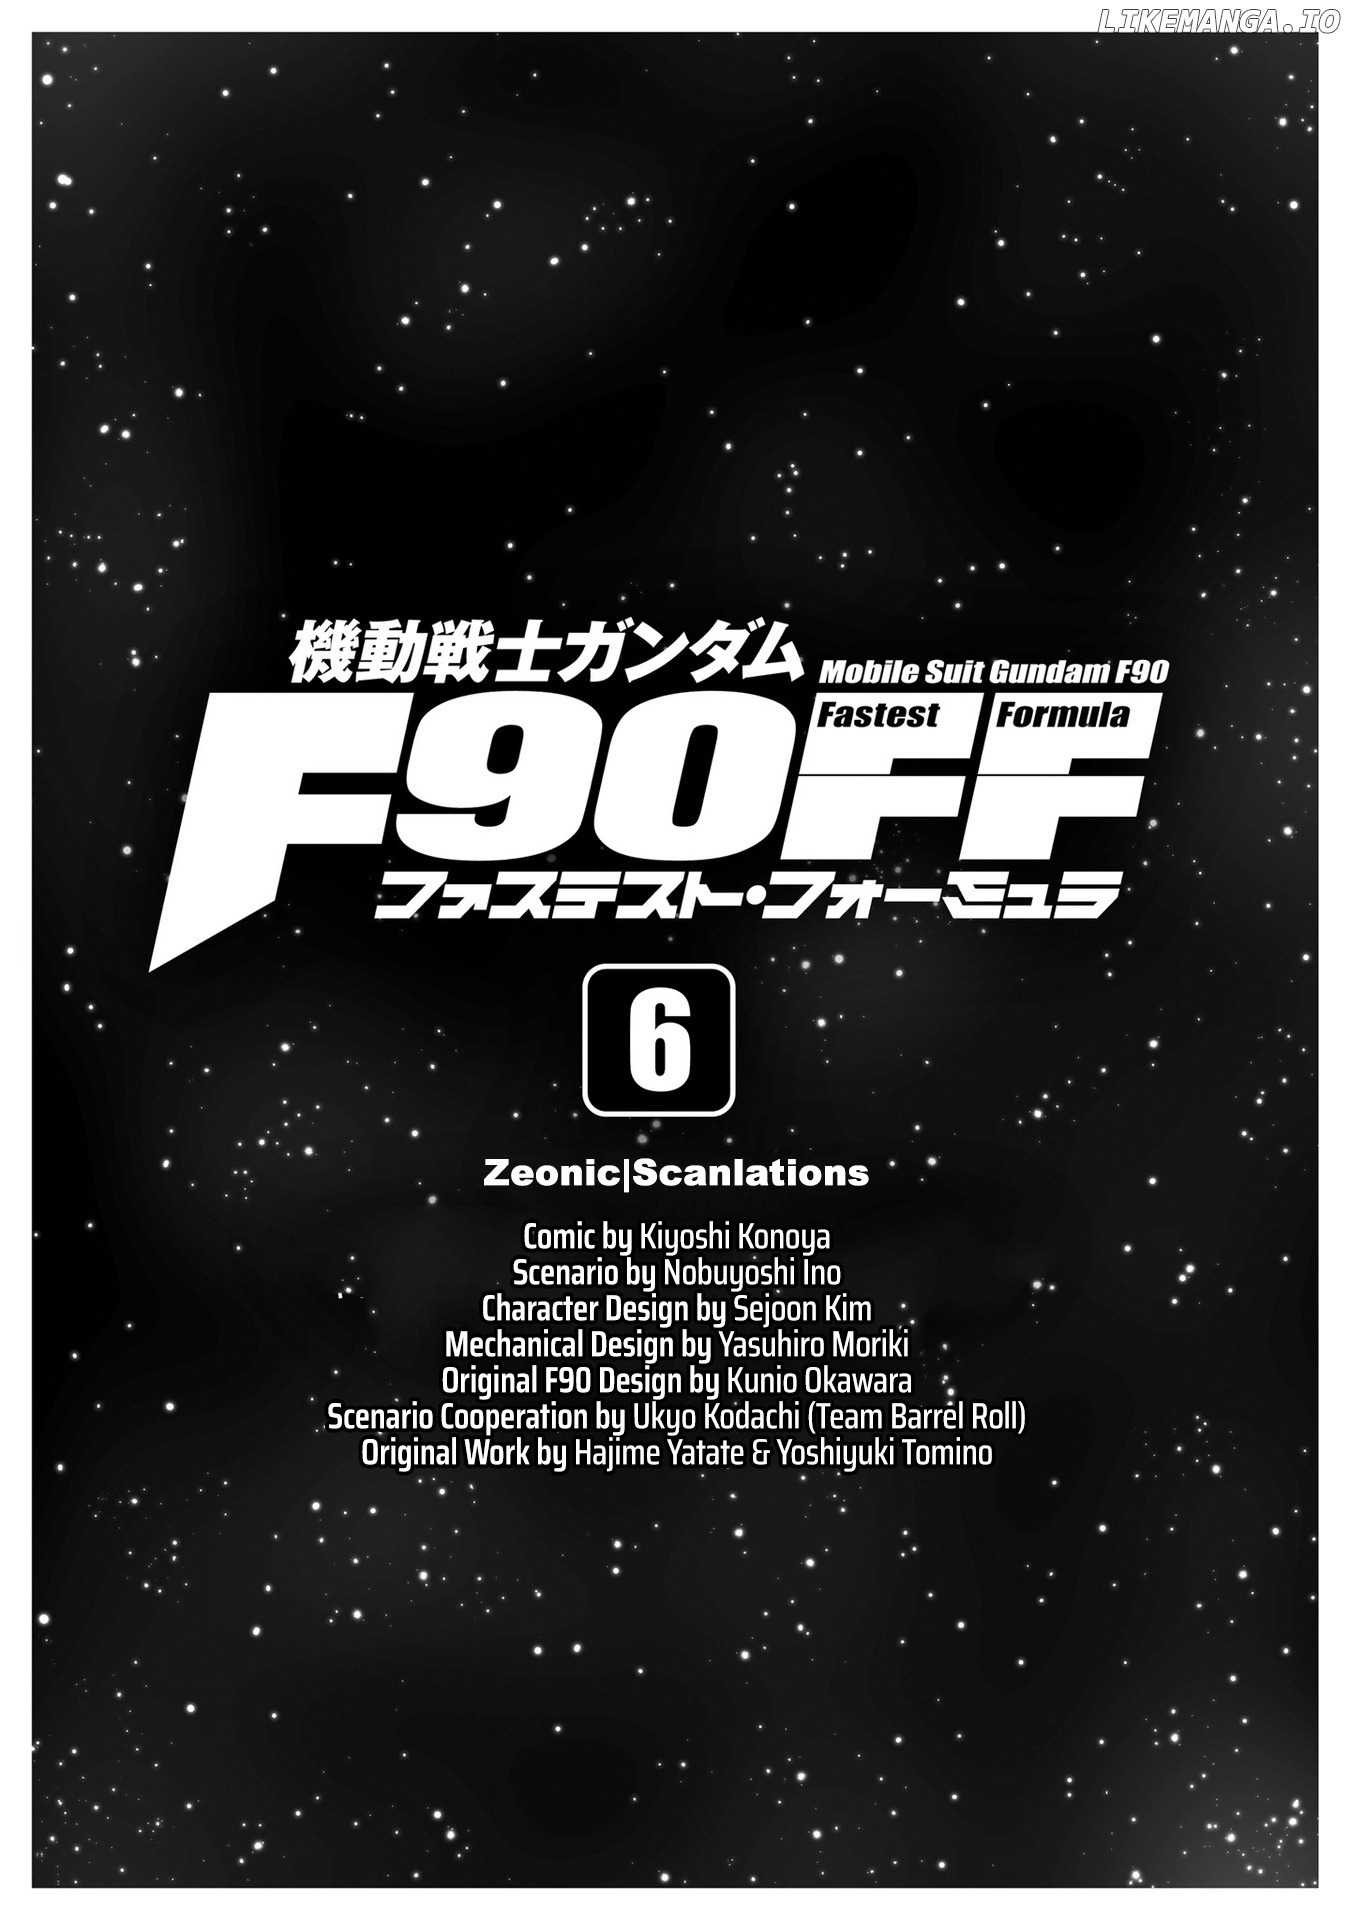 Mobile Suit Gundam F90 FF chapter 19.5 - page 2